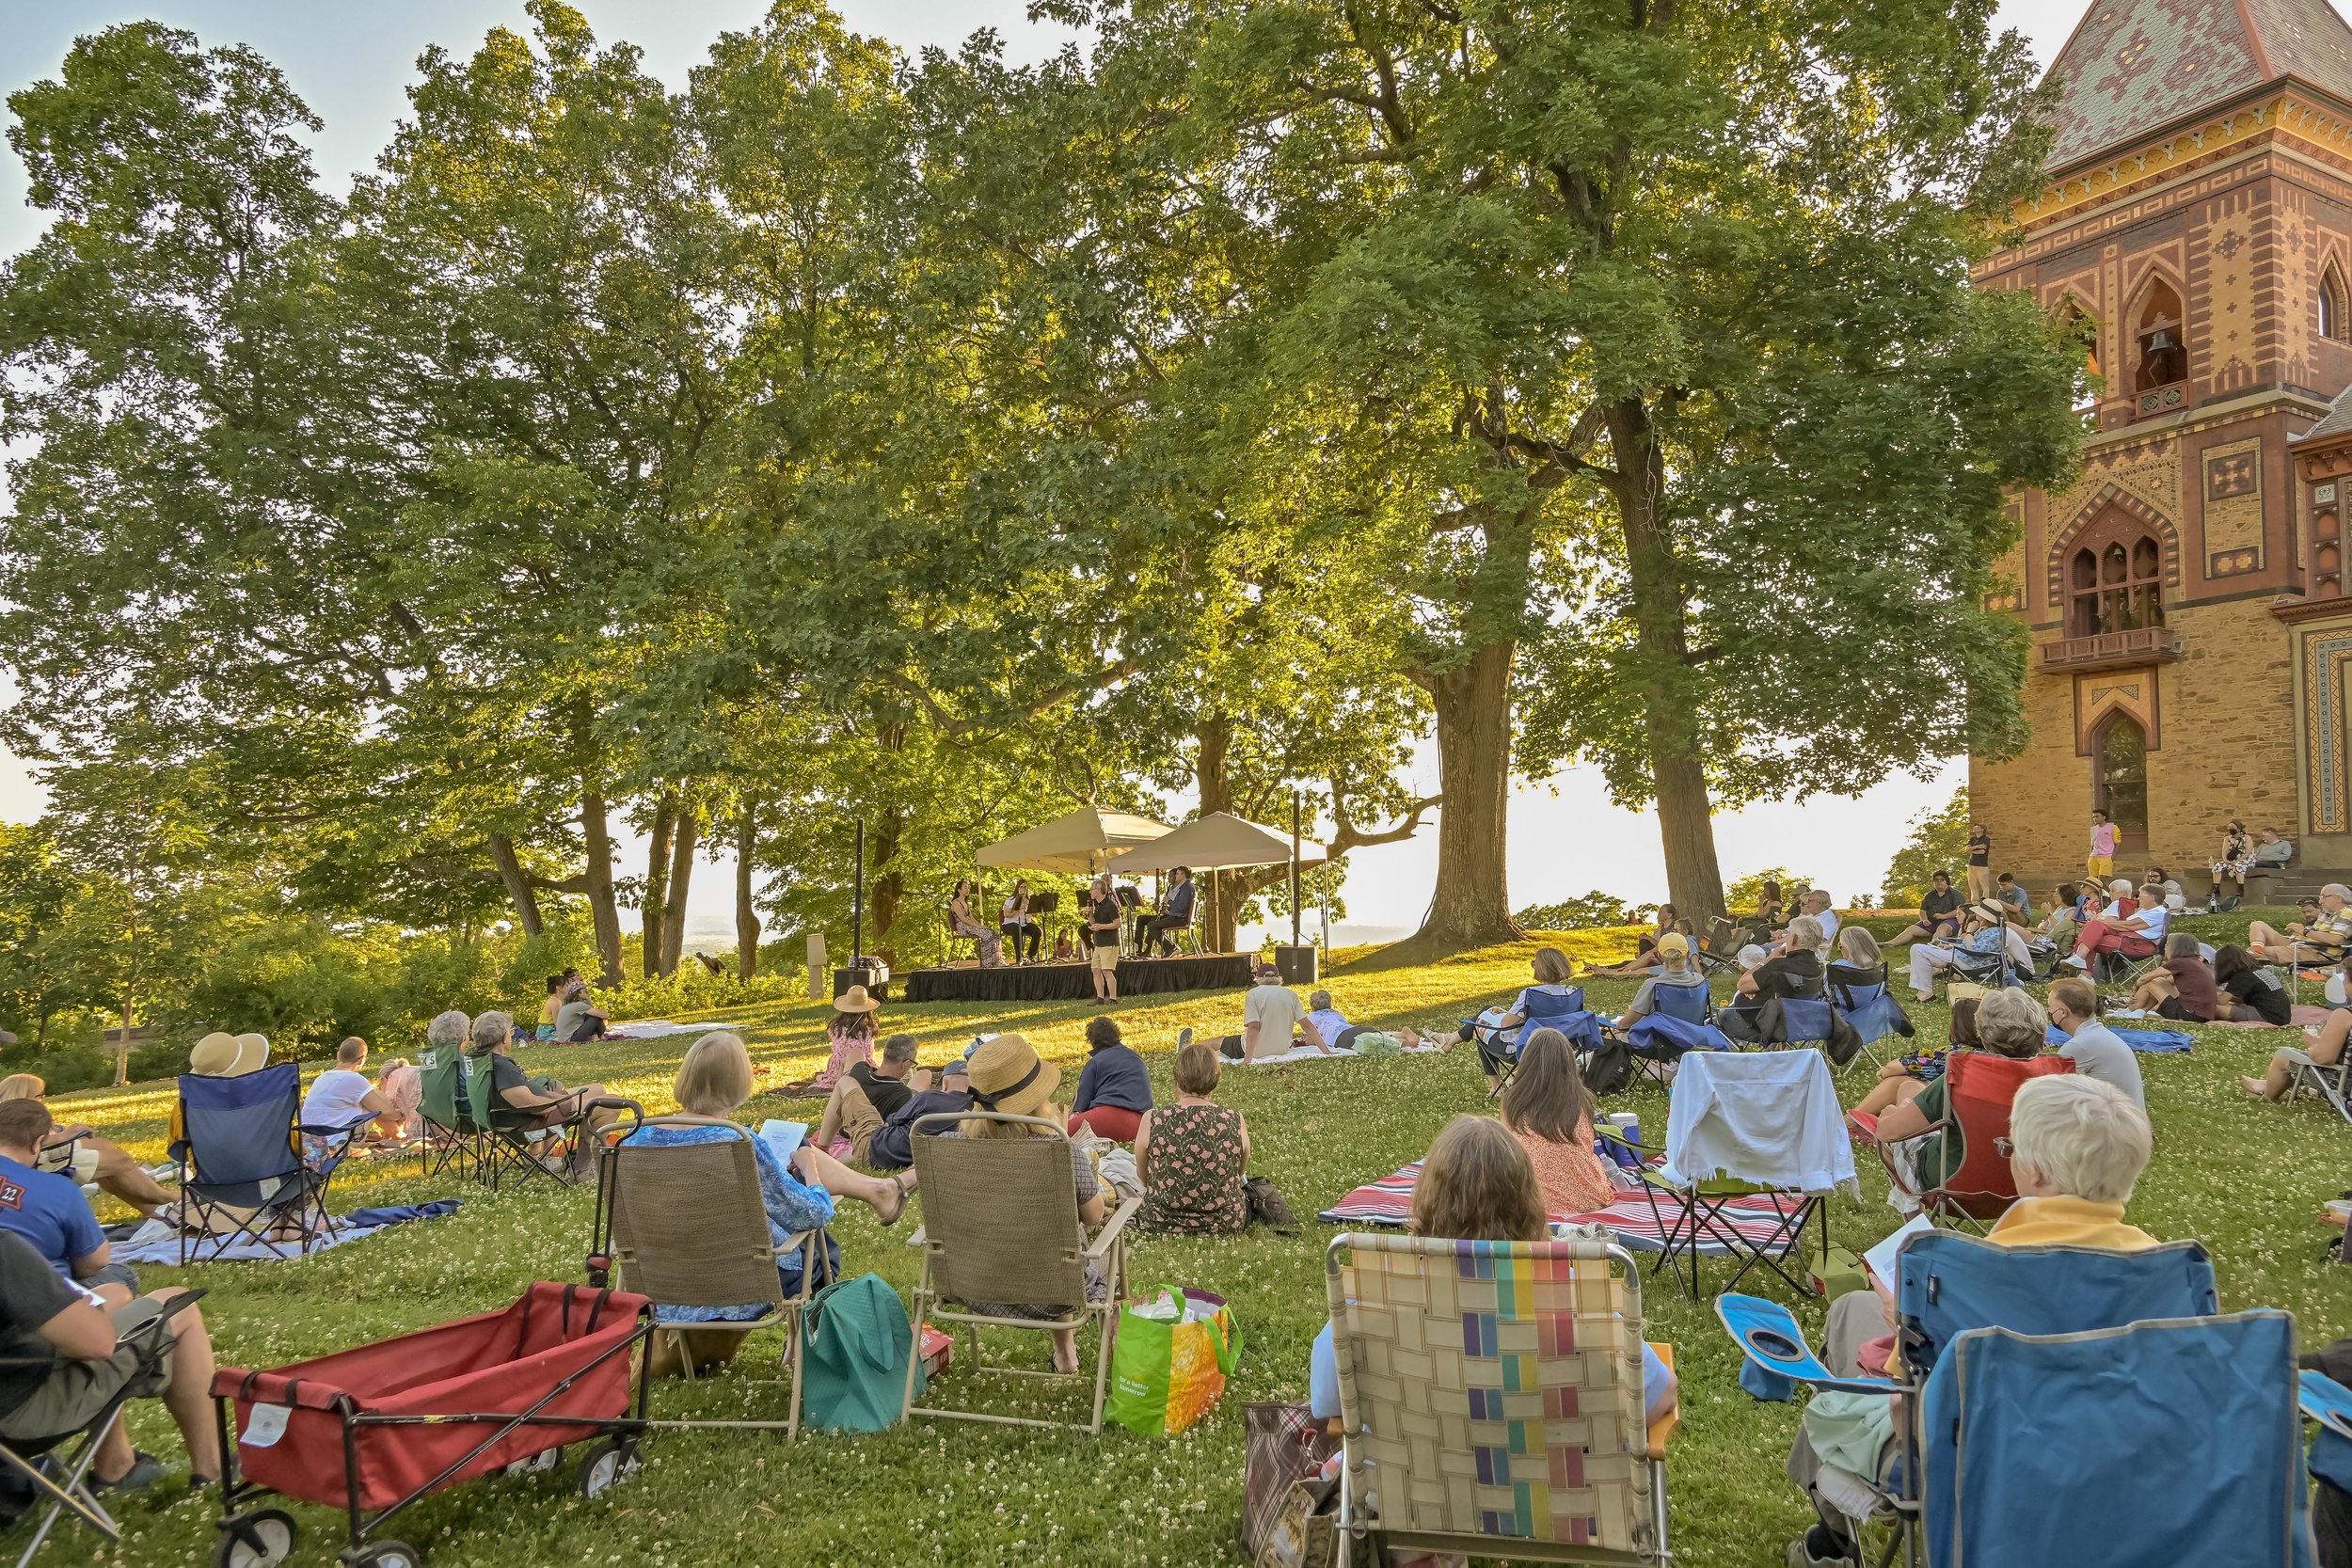  Bring a picnic dinner and enjoy a free outdoor performance by an Albany Symphony Quintet. 